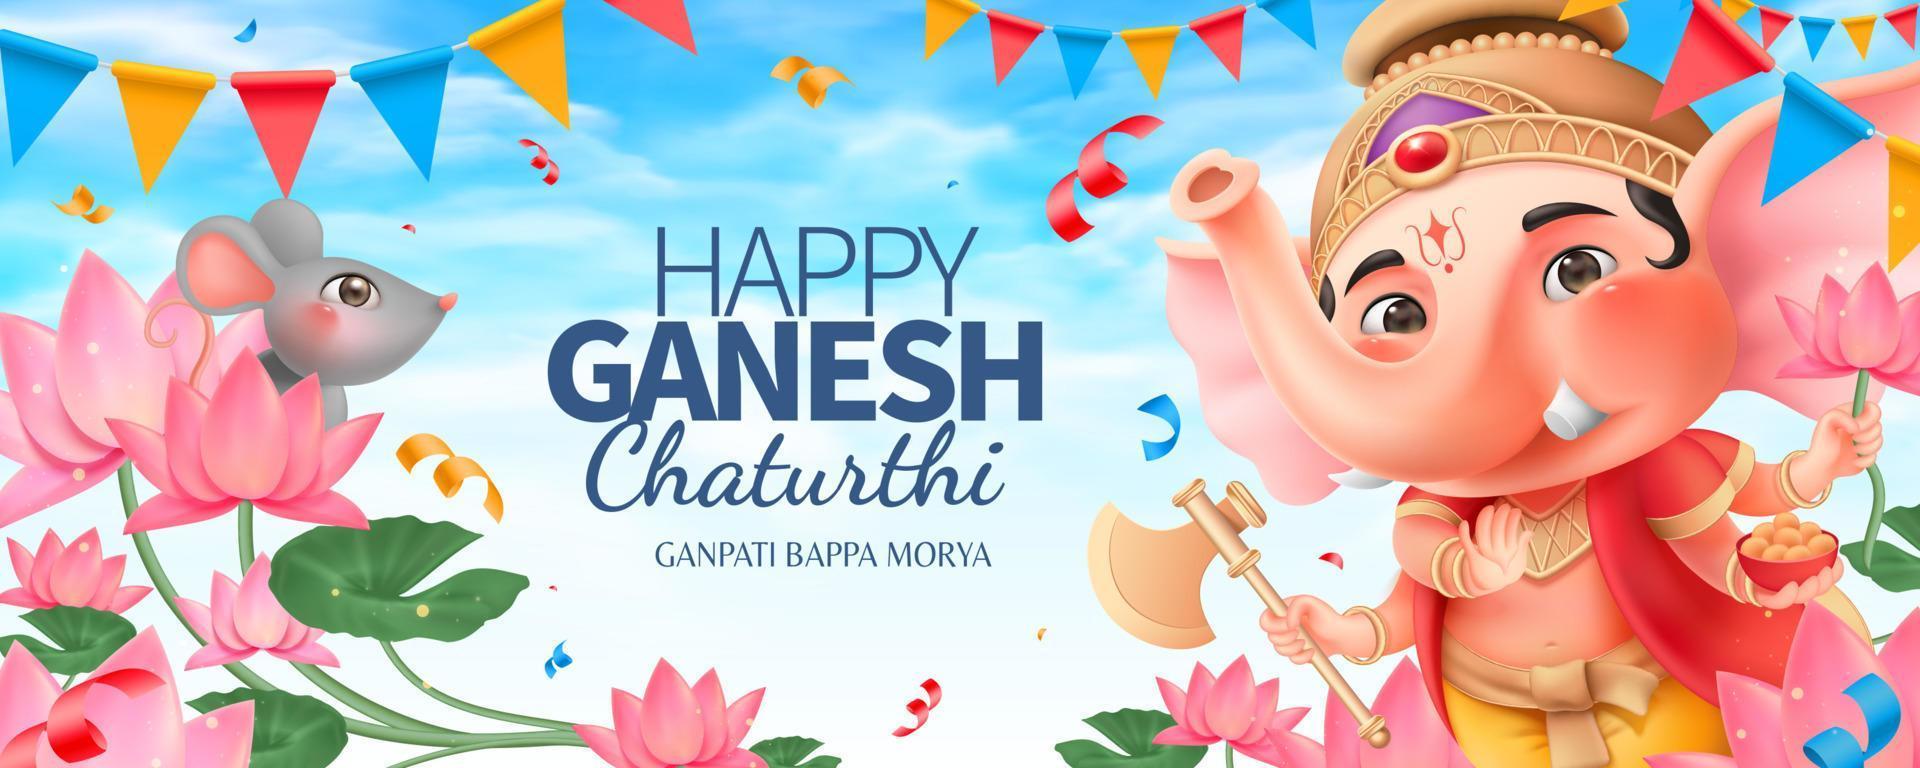 Happy Ganesh chaturthi banner design with lovely chubby Ganesha and beautiful lotus garden vector